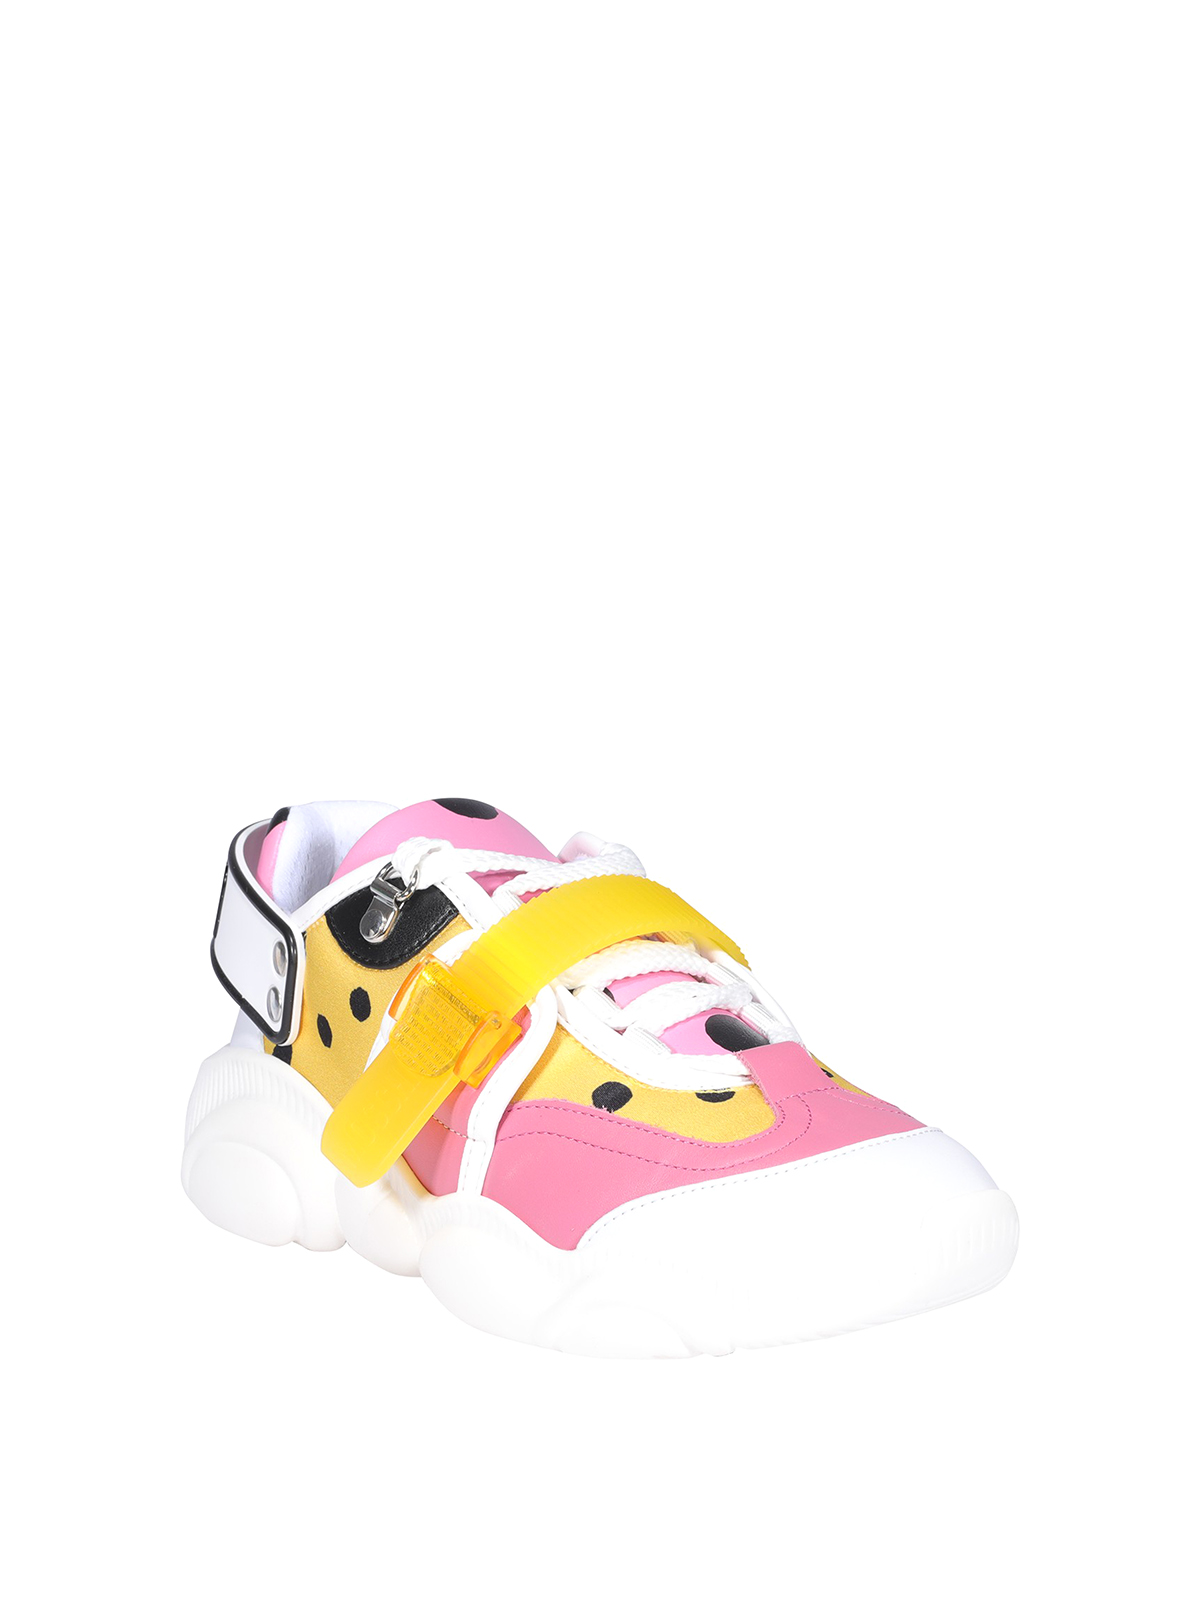 Generator kaart water Trainers Moschino - Teddy Roller Skates sneakers - MA15133G1CMP540A